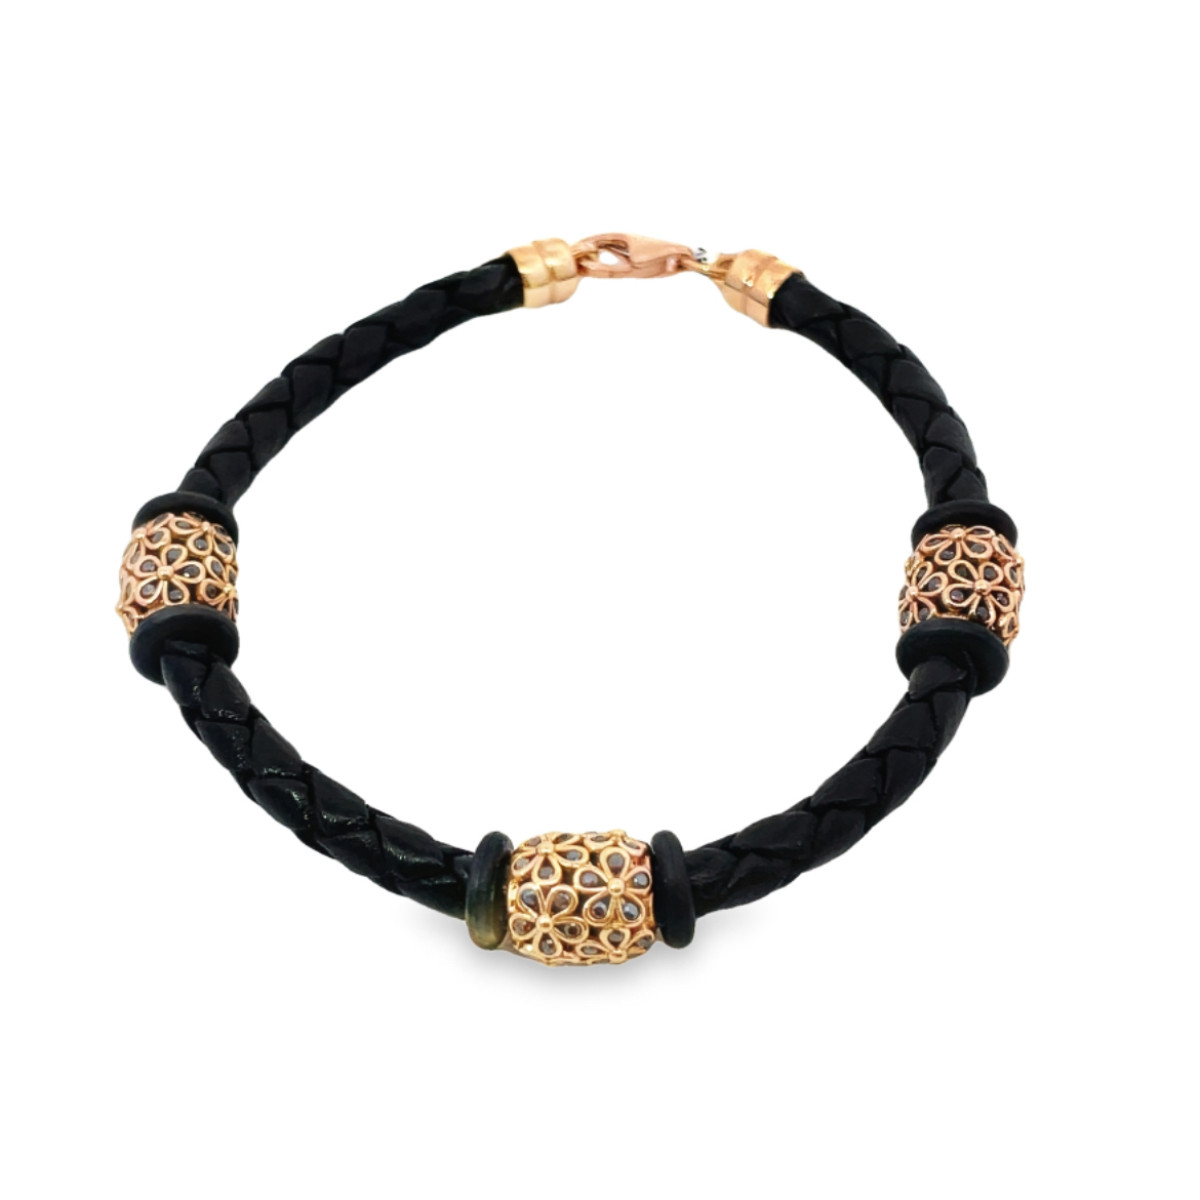  Black braided bracelet decorated with gold details